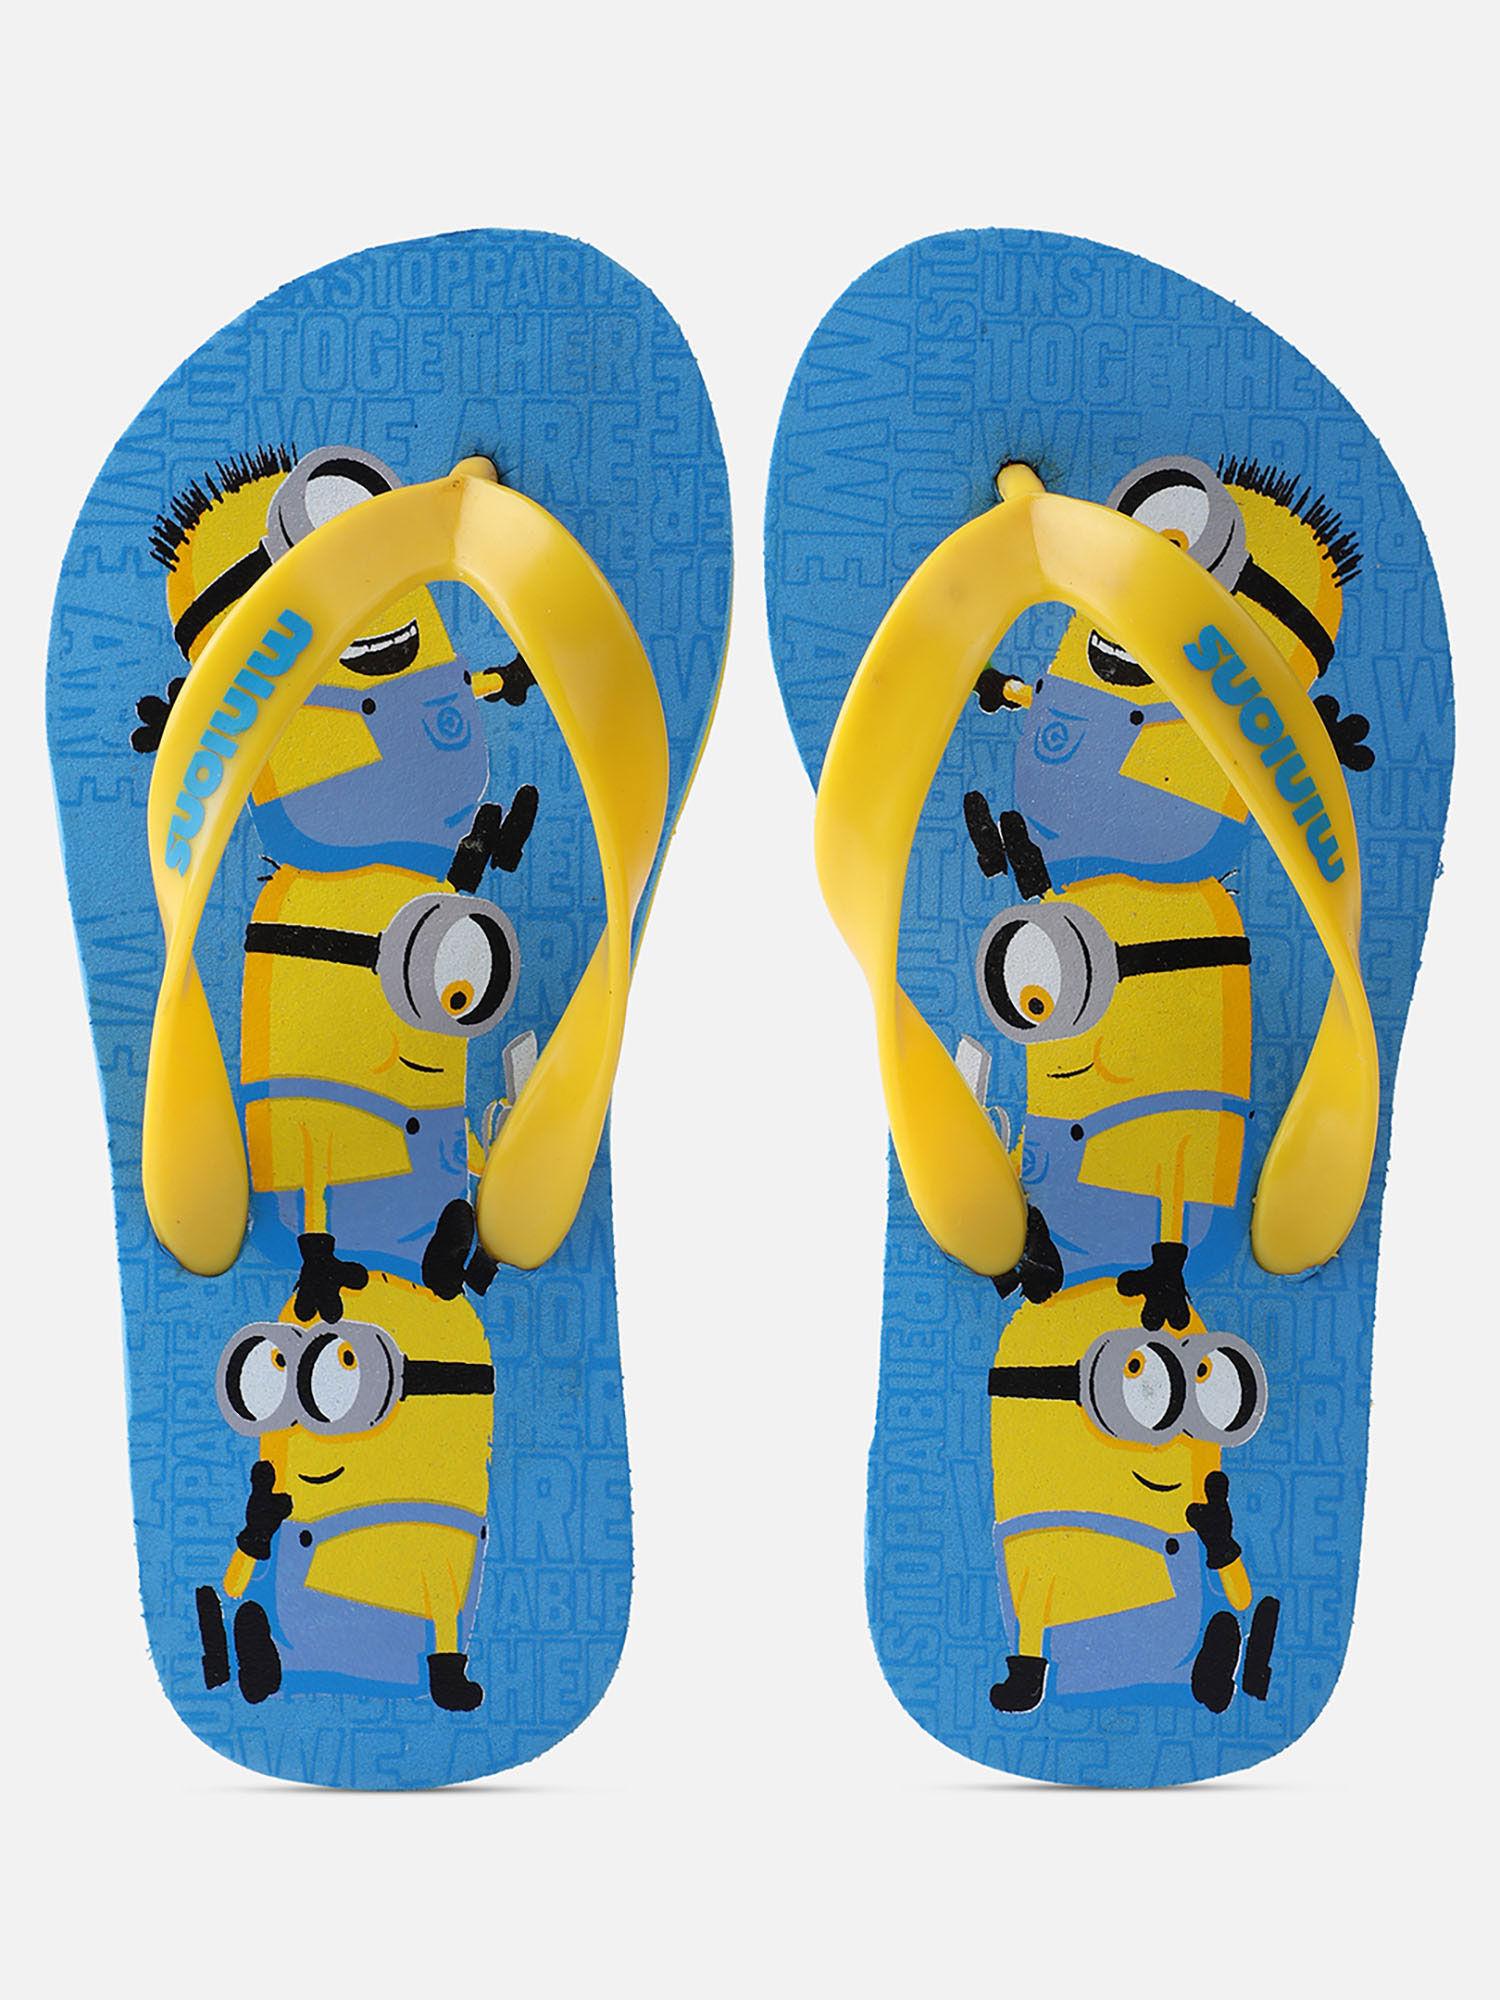 minions featured sky blue flipflops for kids boys